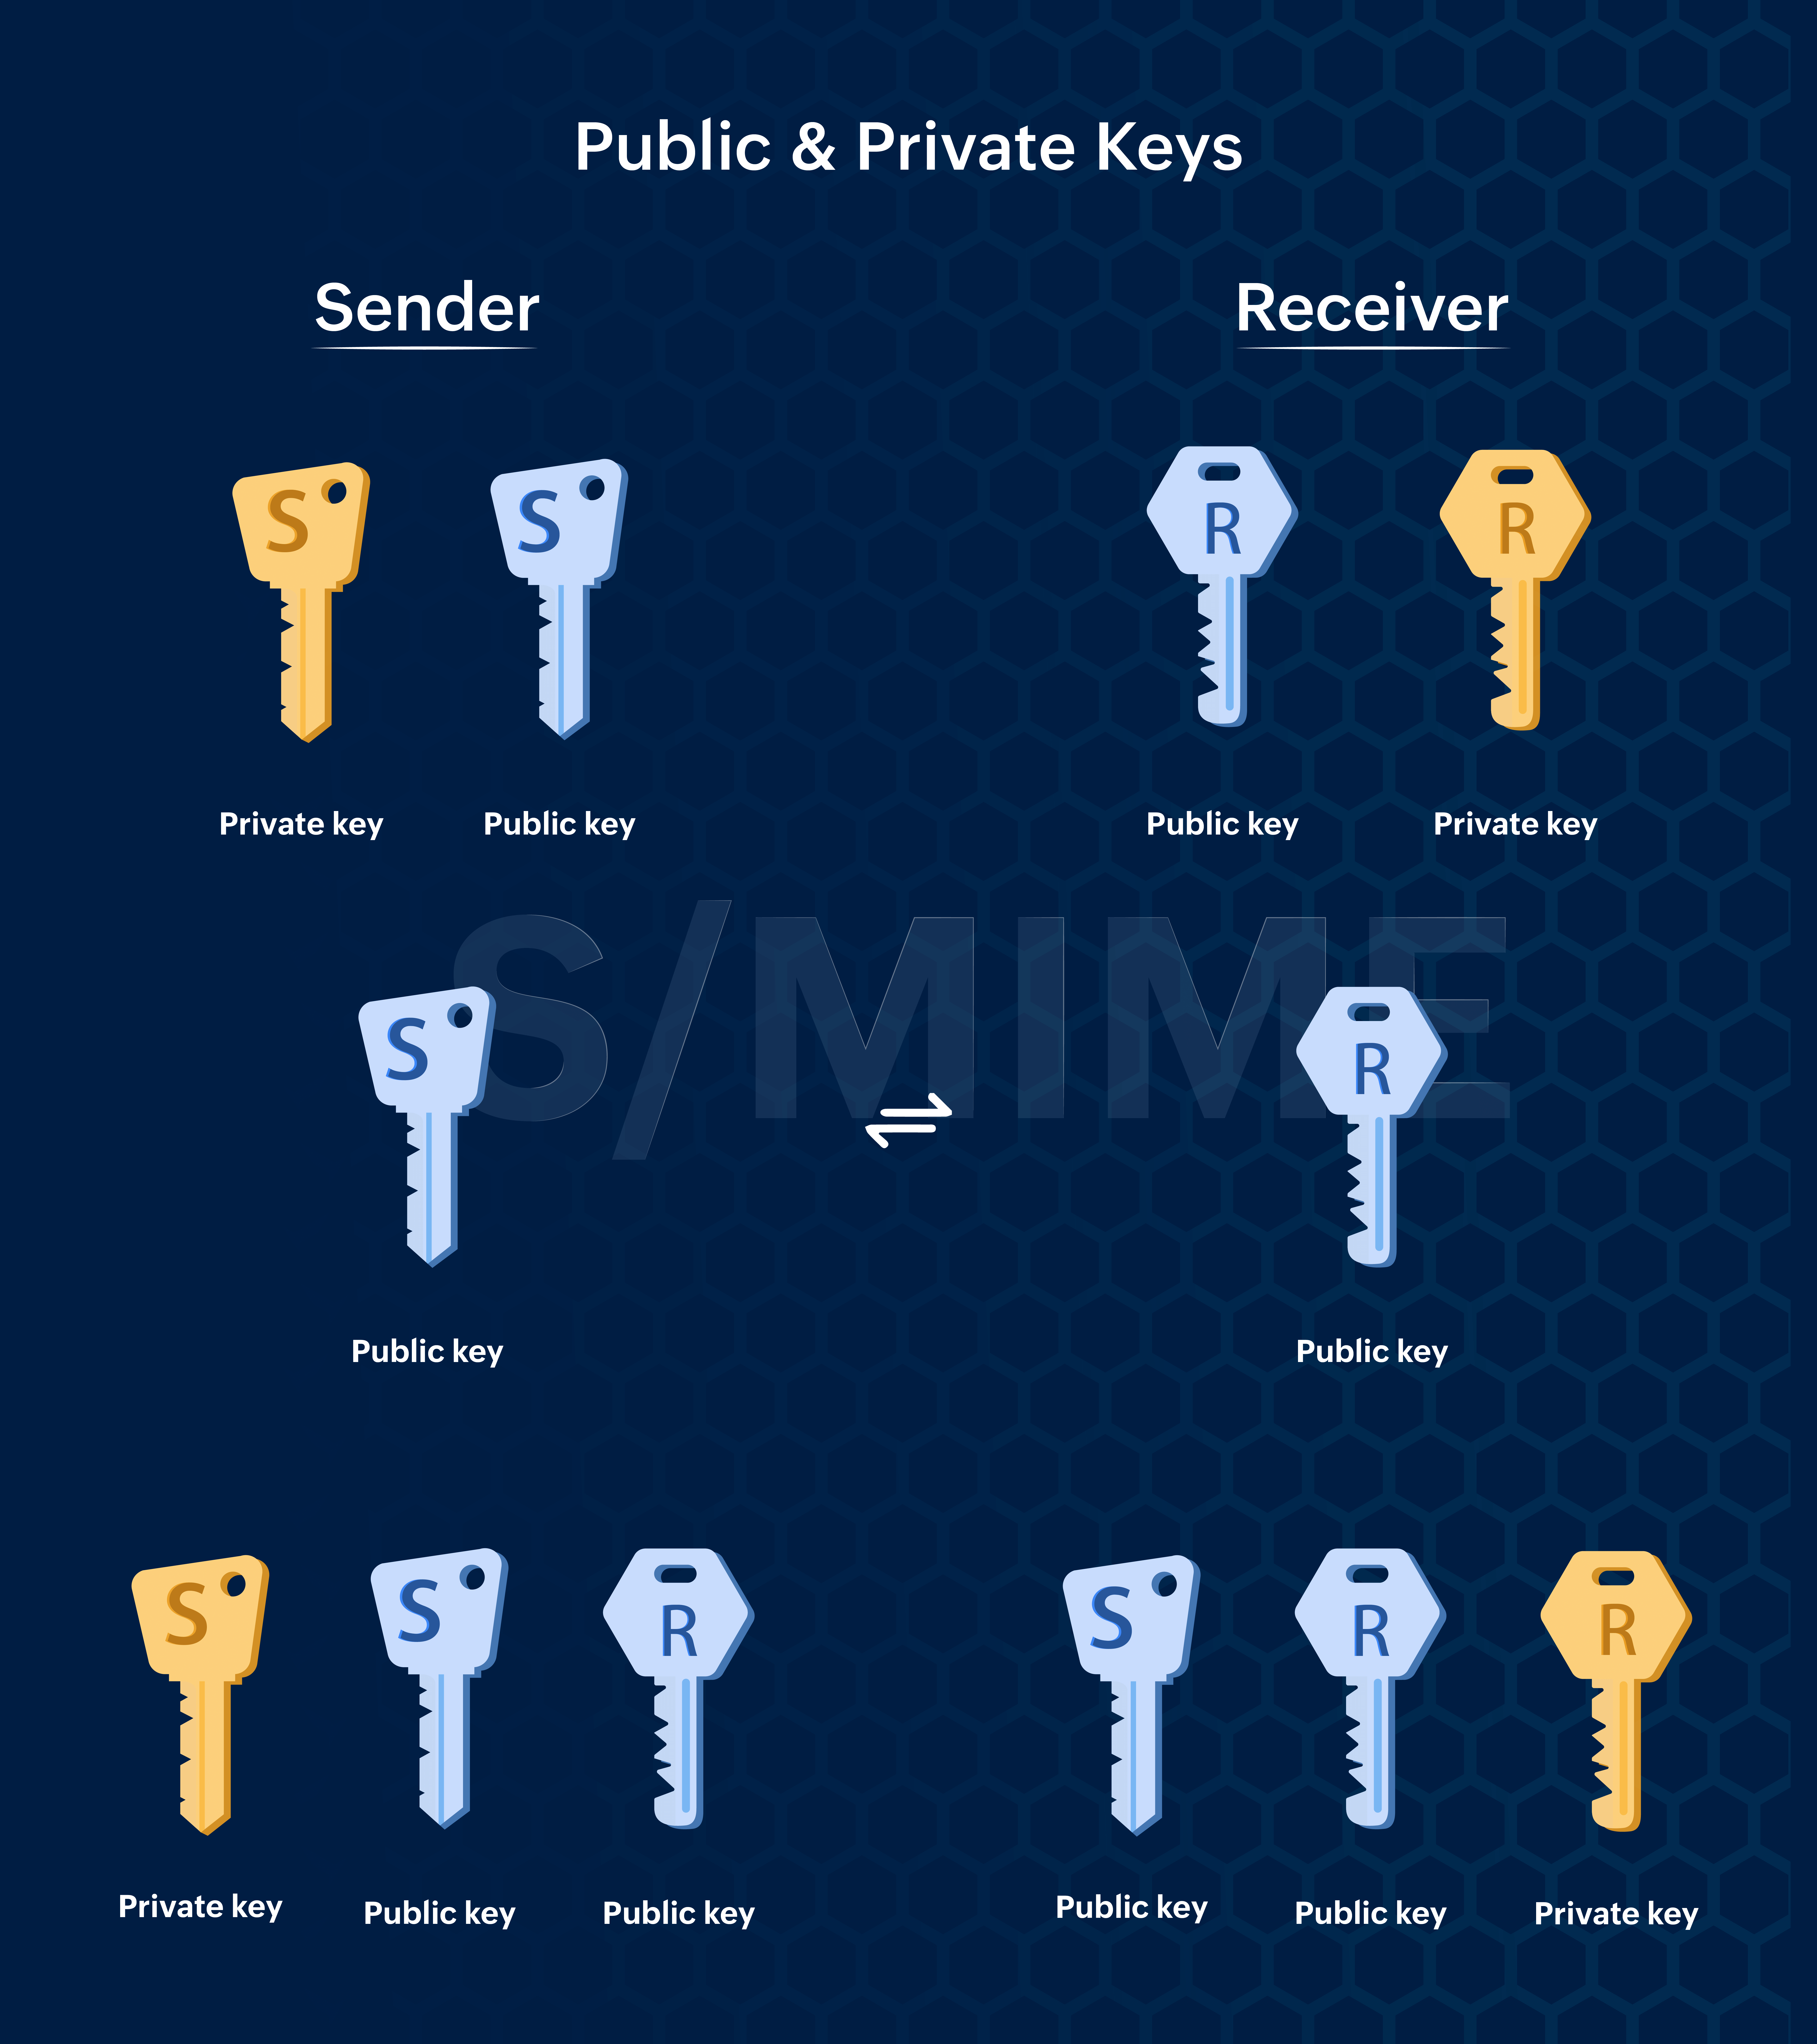 What are Public and Private keys?